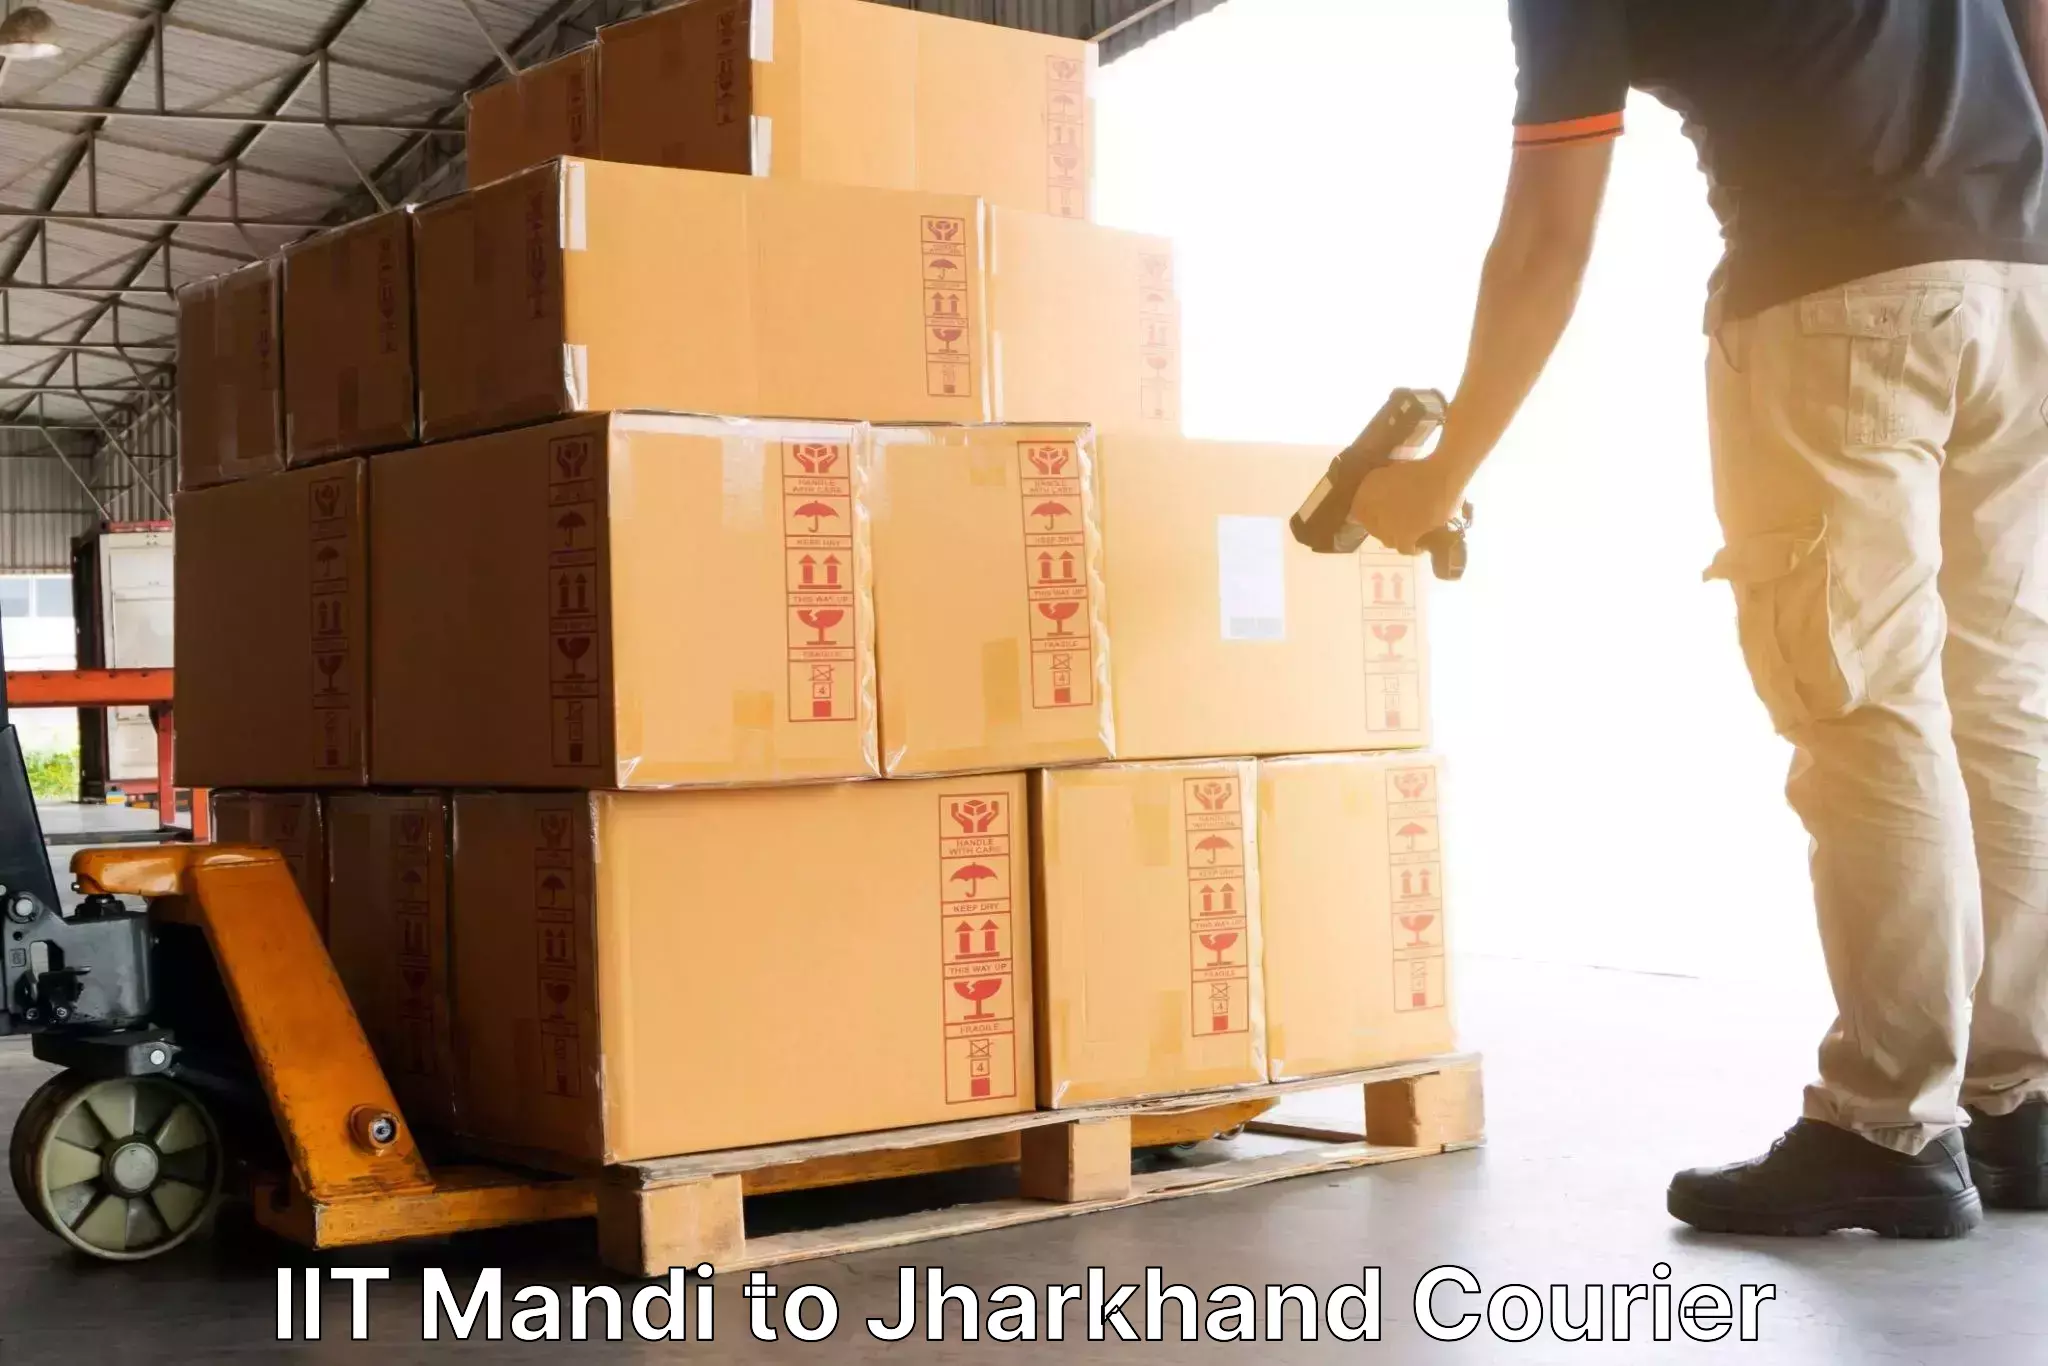 Package delivery network IIT Mandi to Birla Institute of Technology Ranchi